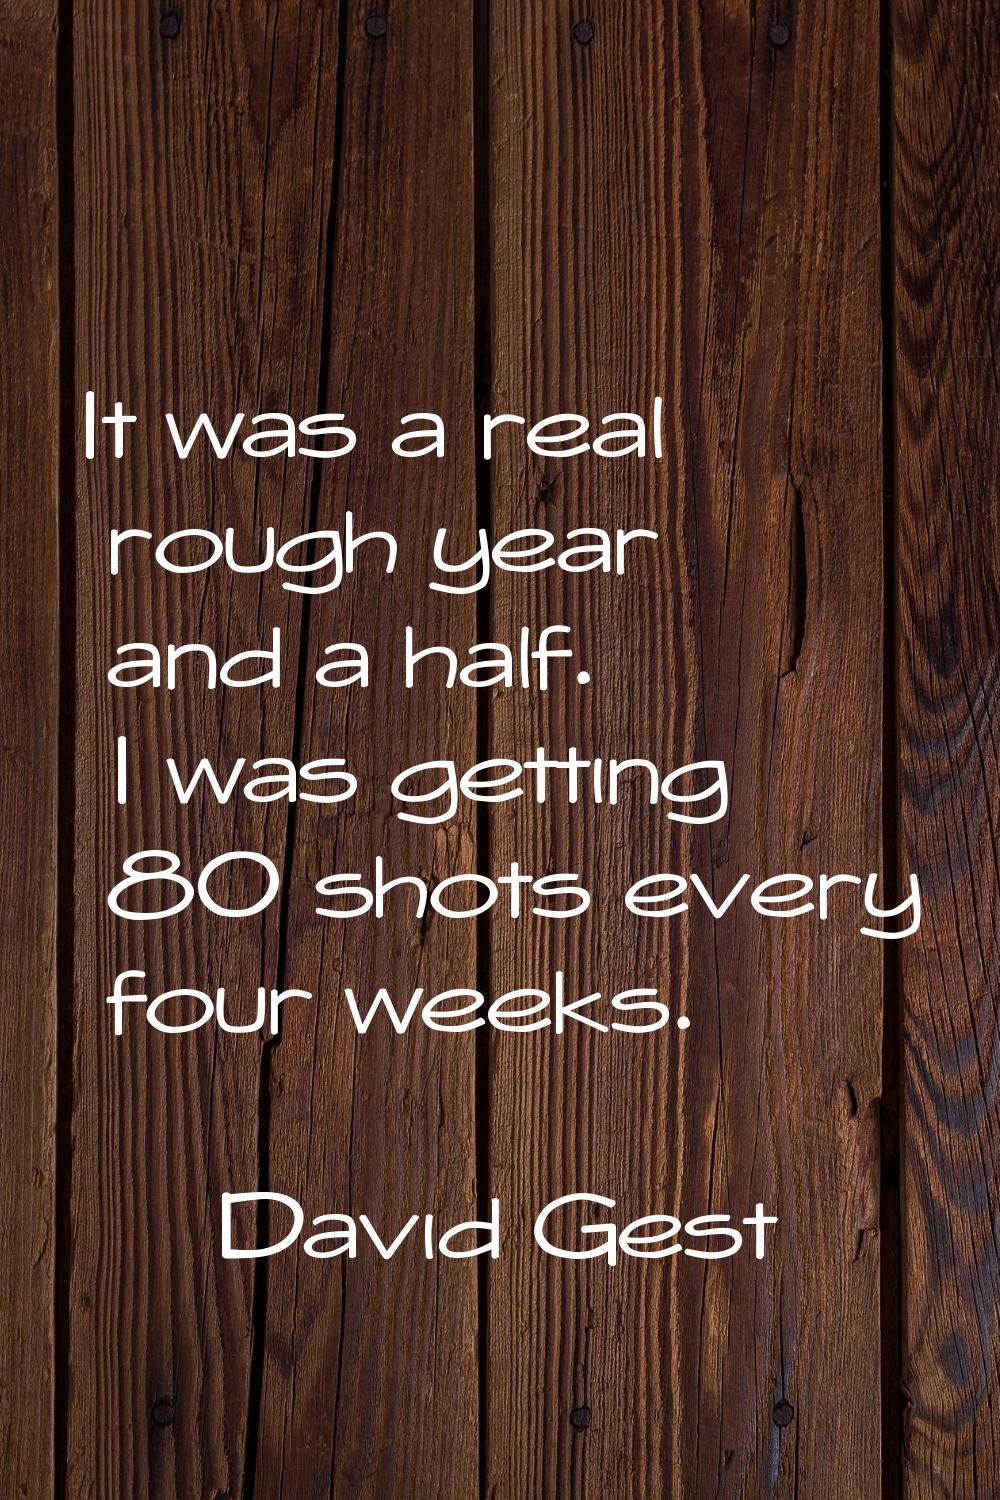 It was a real rough year and a half. I was getting 80 shots every four weeks.